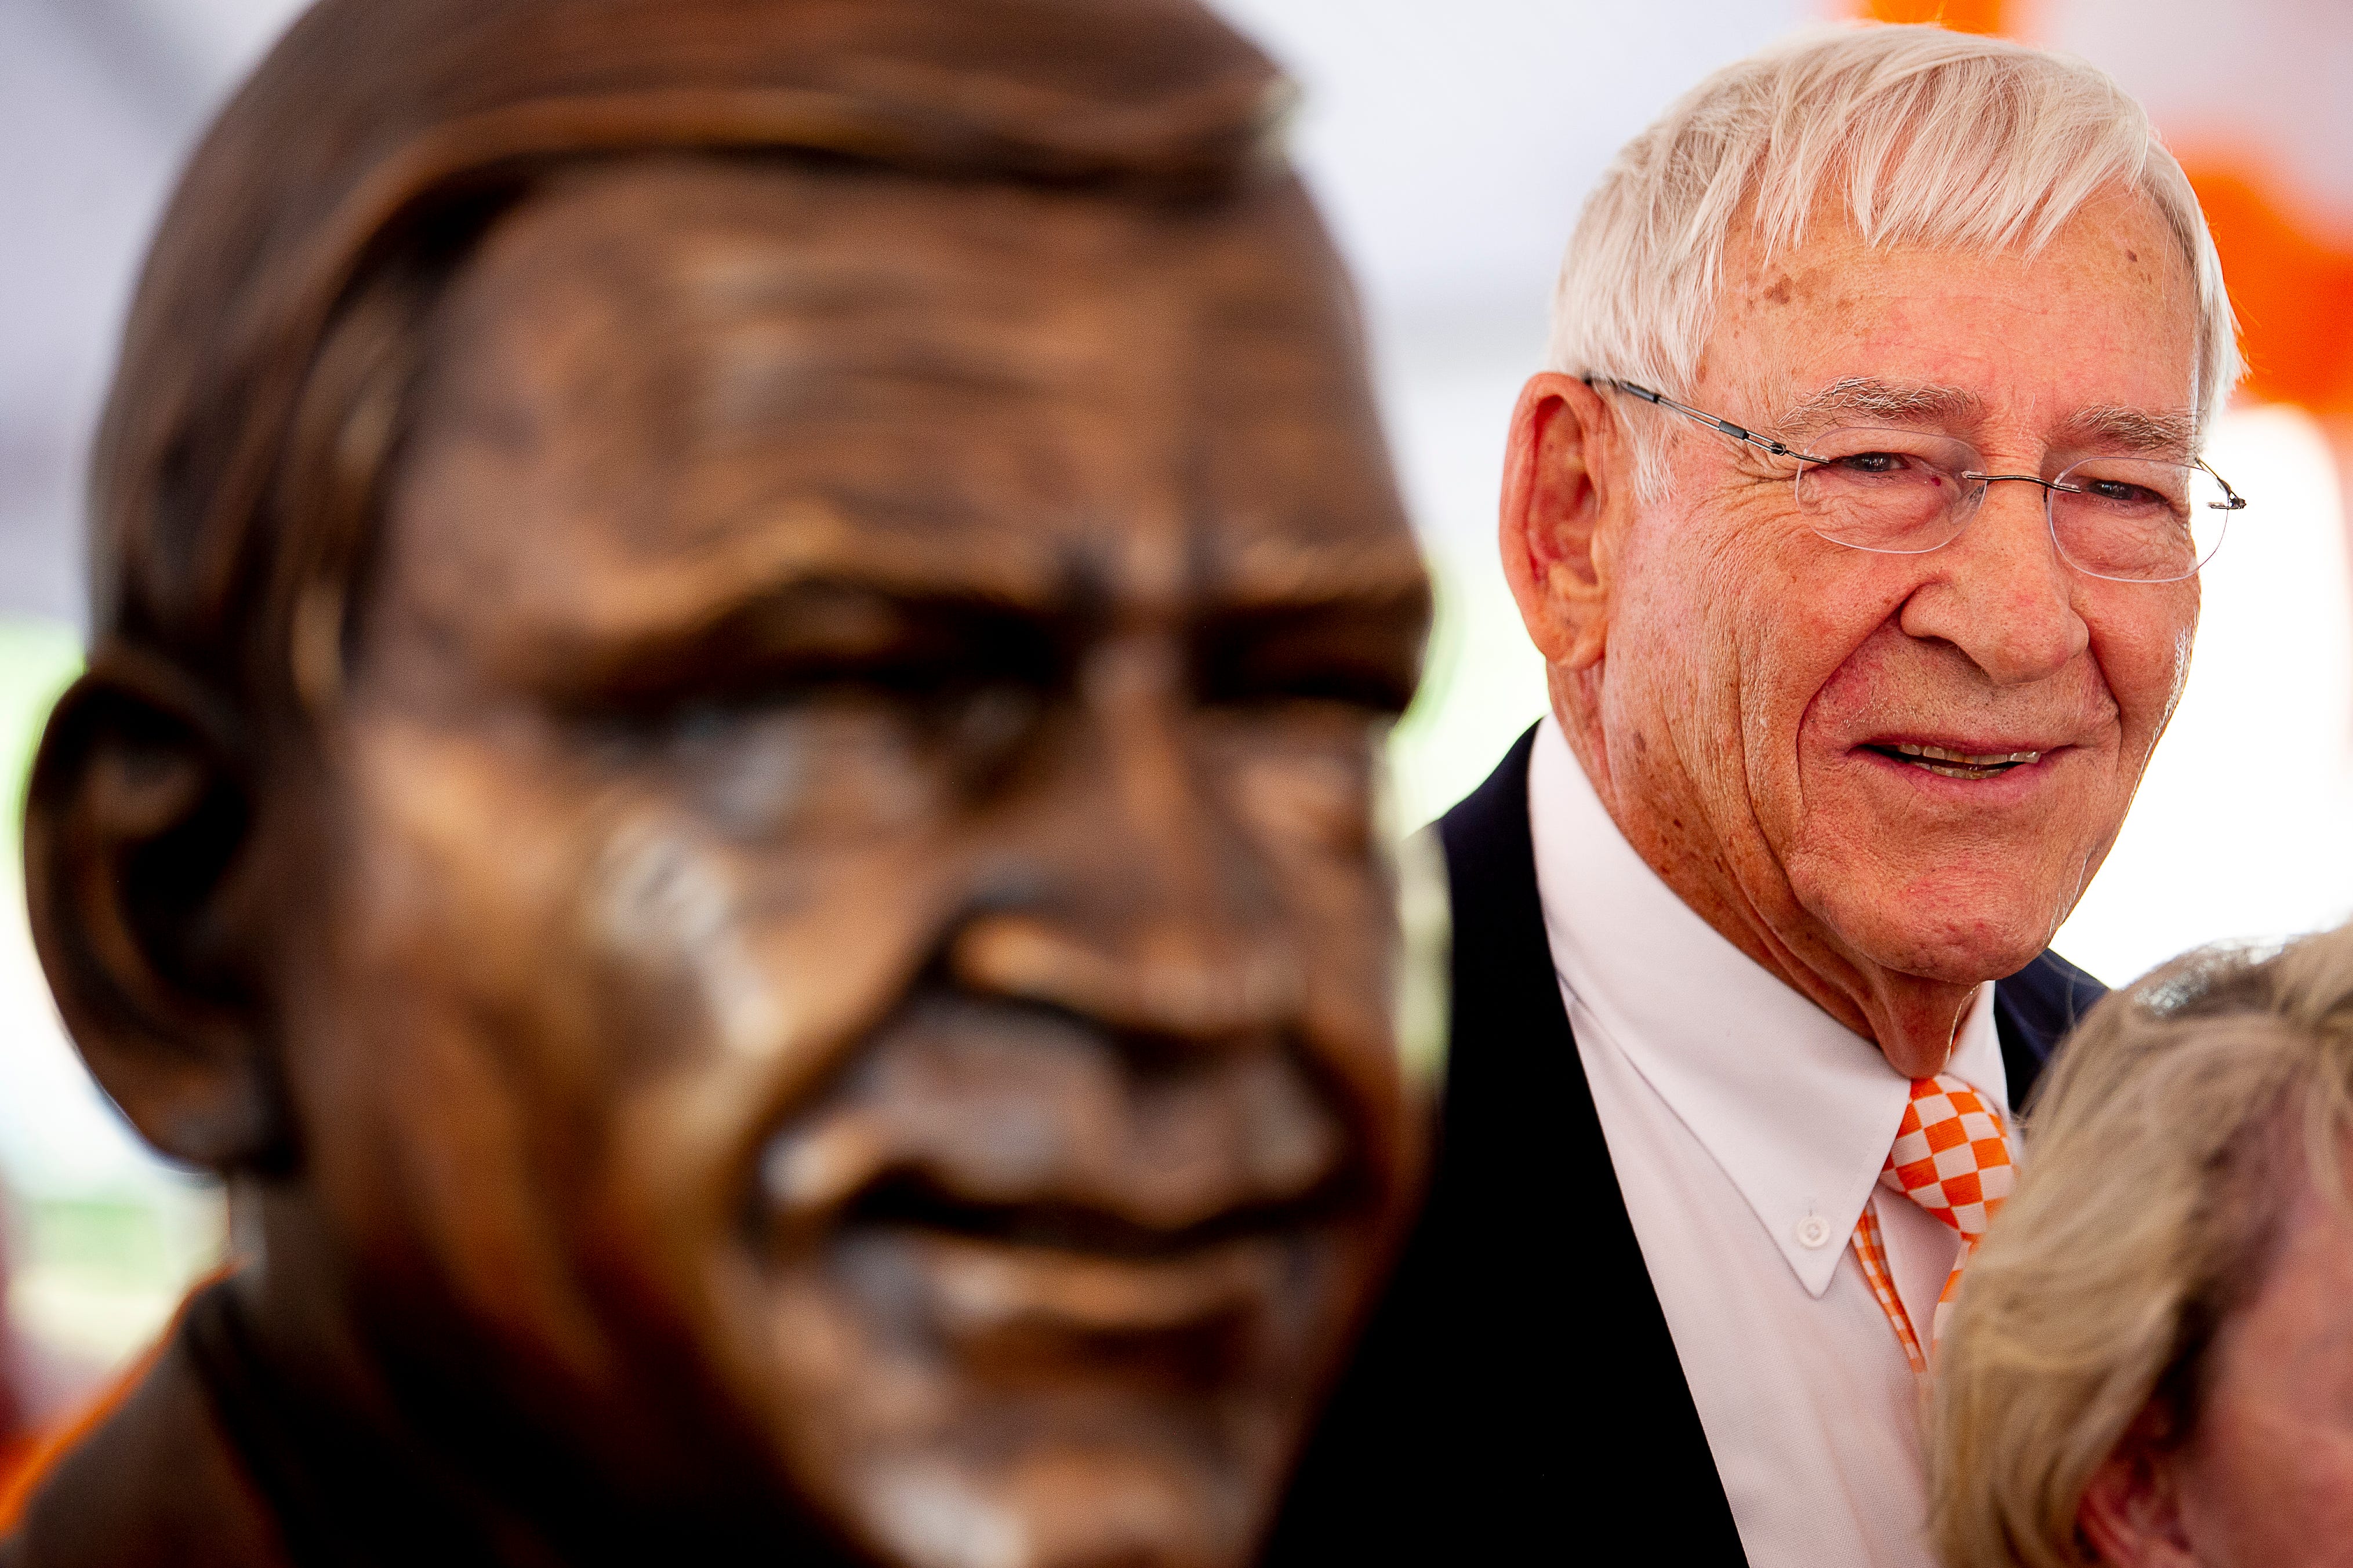 Former Tennessee coach and athletic director Doug Dickey stands beside a newly unveiled bust of him during a dedication ceremony of the Doug Dickey Hall of Fame Plaza at the Neyland-Thompson Sports Complex in Knoxville, Tennessee on Friday, October 4, 2019. Dickey led UT to its second SEC title in 1969 and served as the Vols' Director of Athletics from 1986 to 2003.